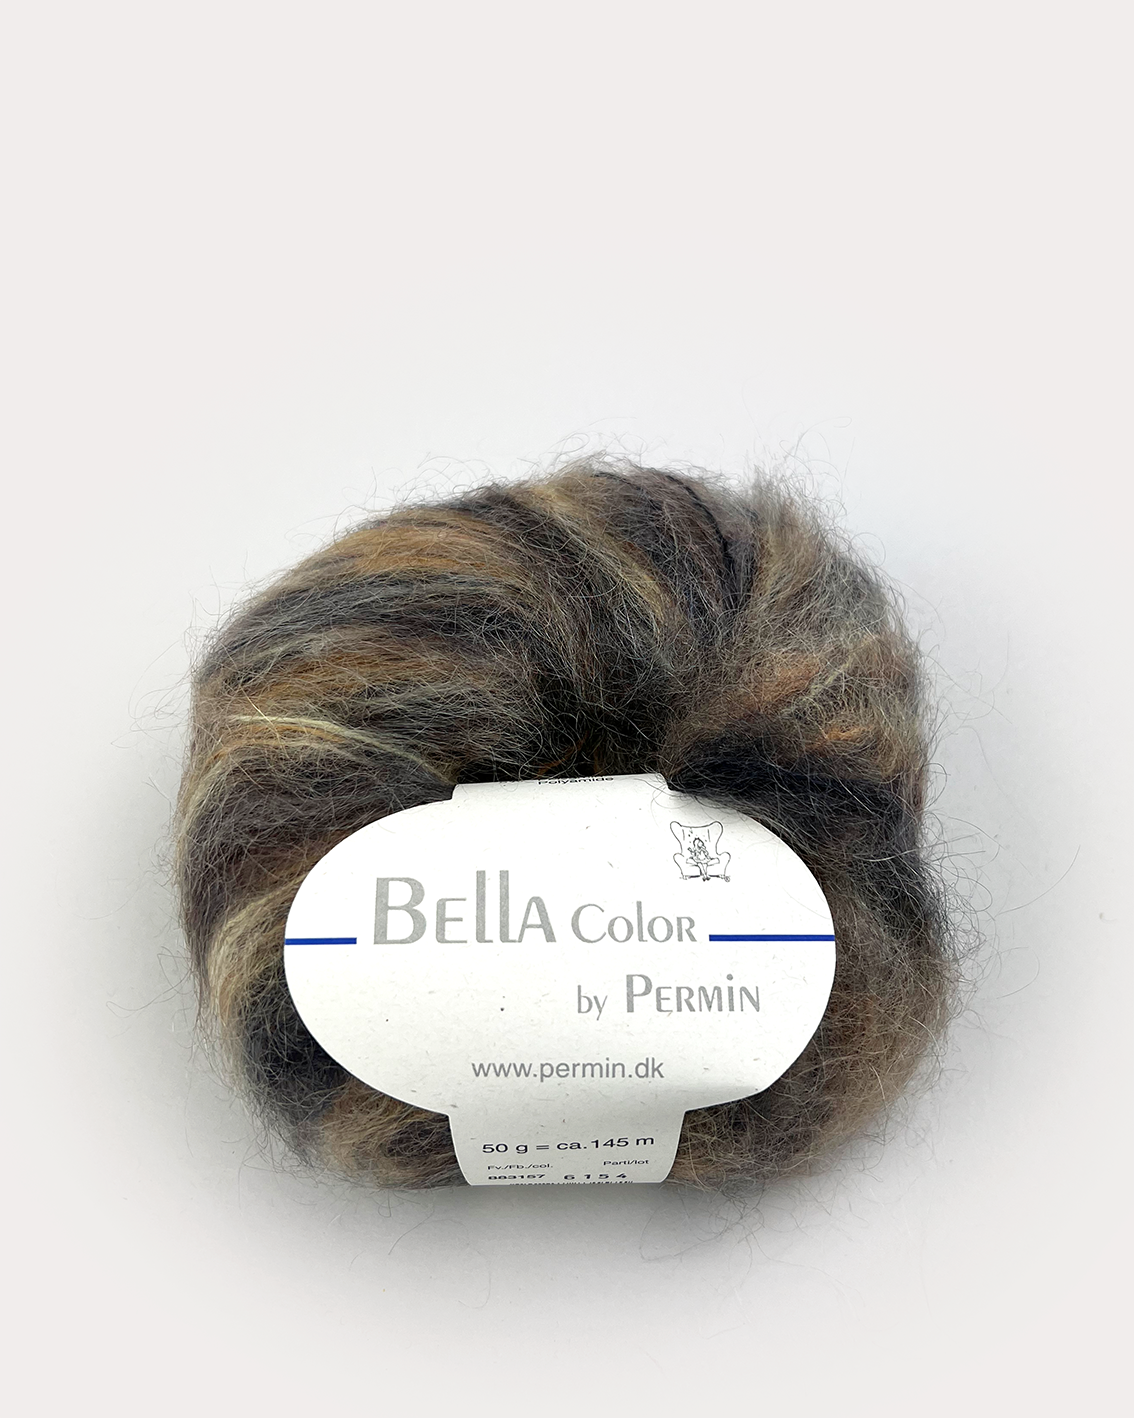 BELLA COLOR MOHAIR By Permin 883157 Beige